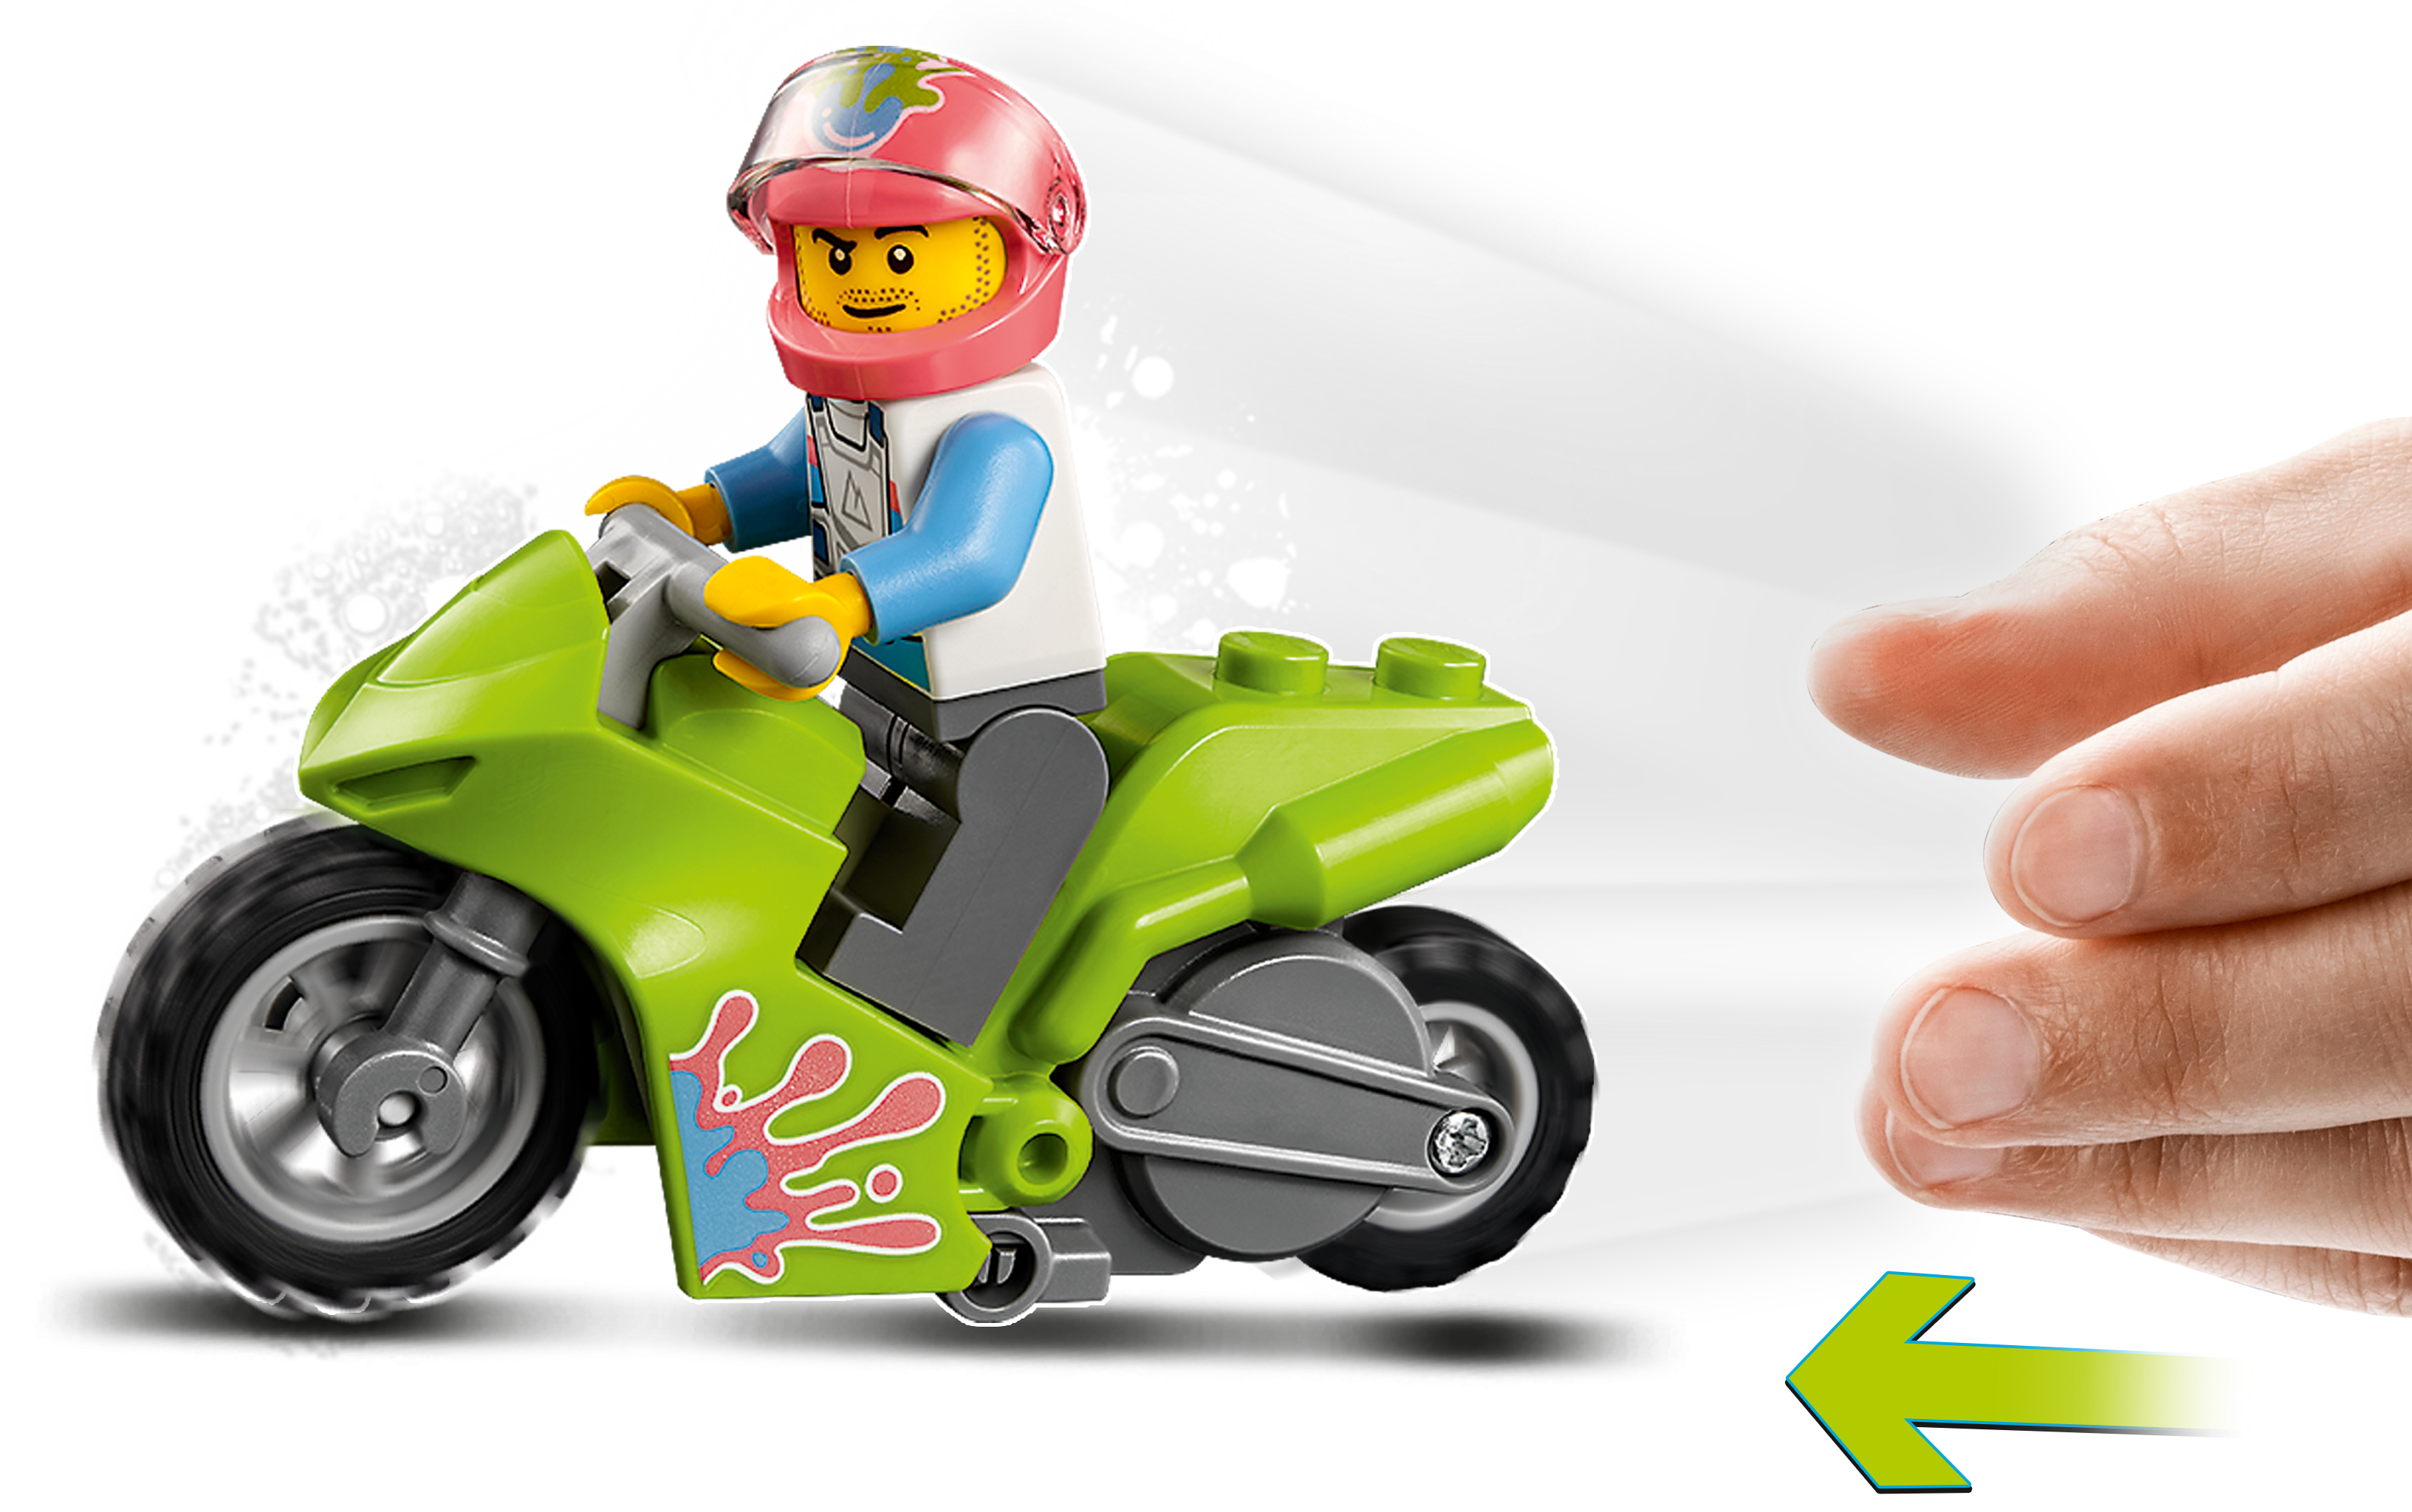 Stunt Show Arena 60295 | at online US Shop the LEGO® Official City | Buy